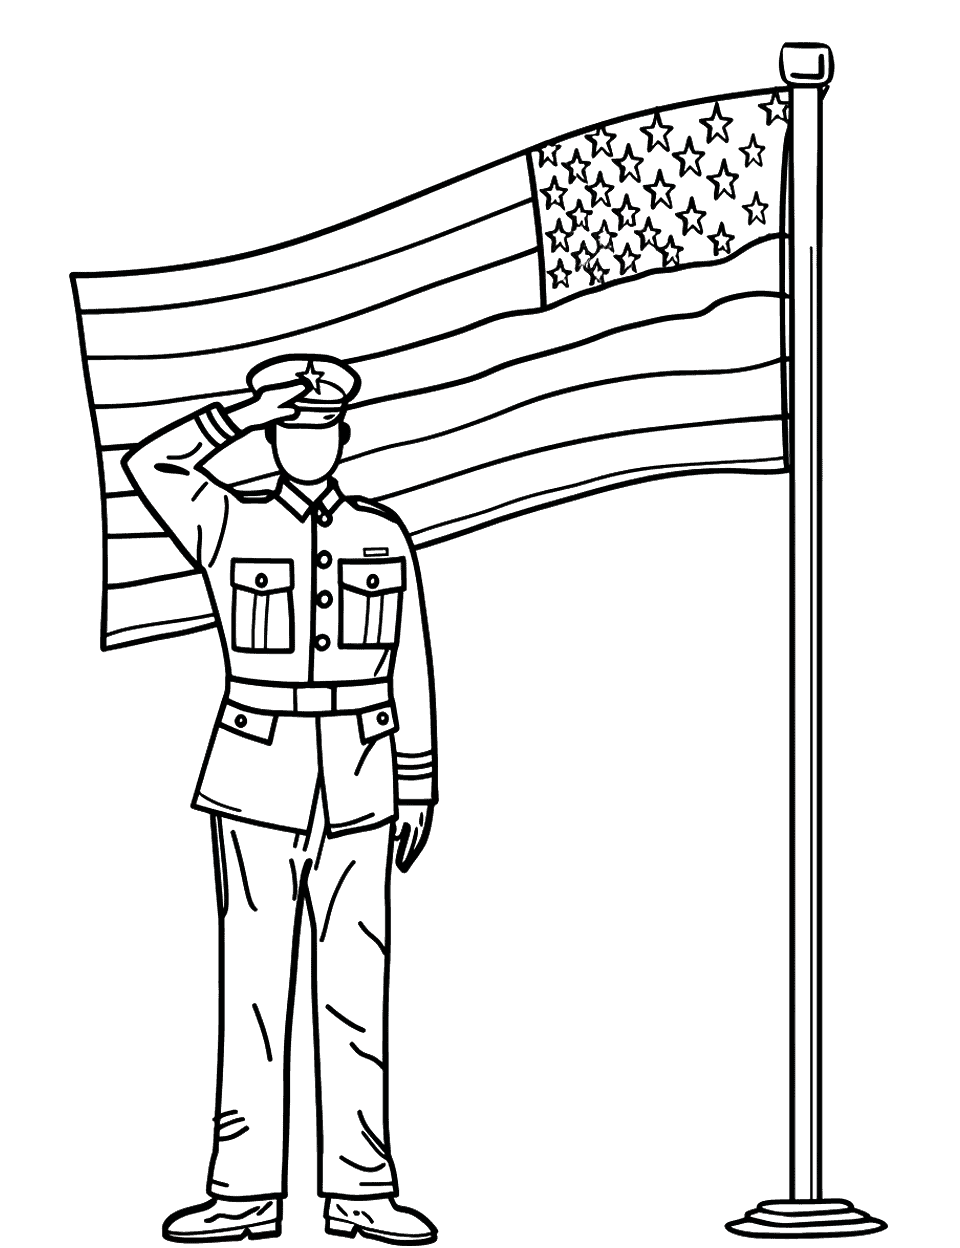 US Military Salute American Flag Coloring Page - Soldier in uniform saluting the American flag during a ceremony.